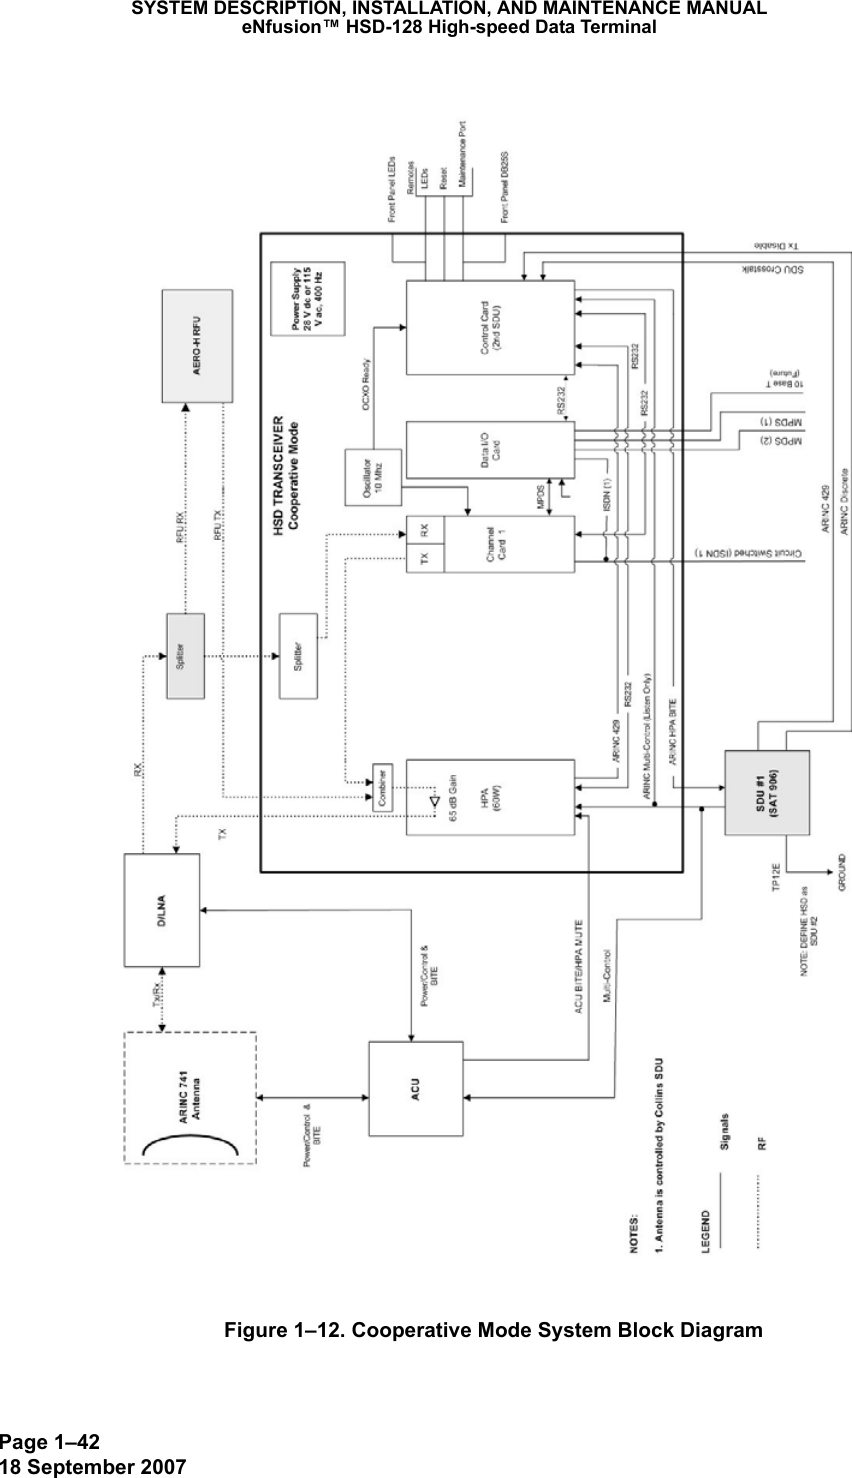 Page 1–4218 September 2007SYSTEM DESCRIPTION, INSTALLATION, AND MAINTENANCE MANUALeNfusion™ HSD-128 High-speed Data Terminal Figure 1–12. Cooperative Mode System Block Diagram